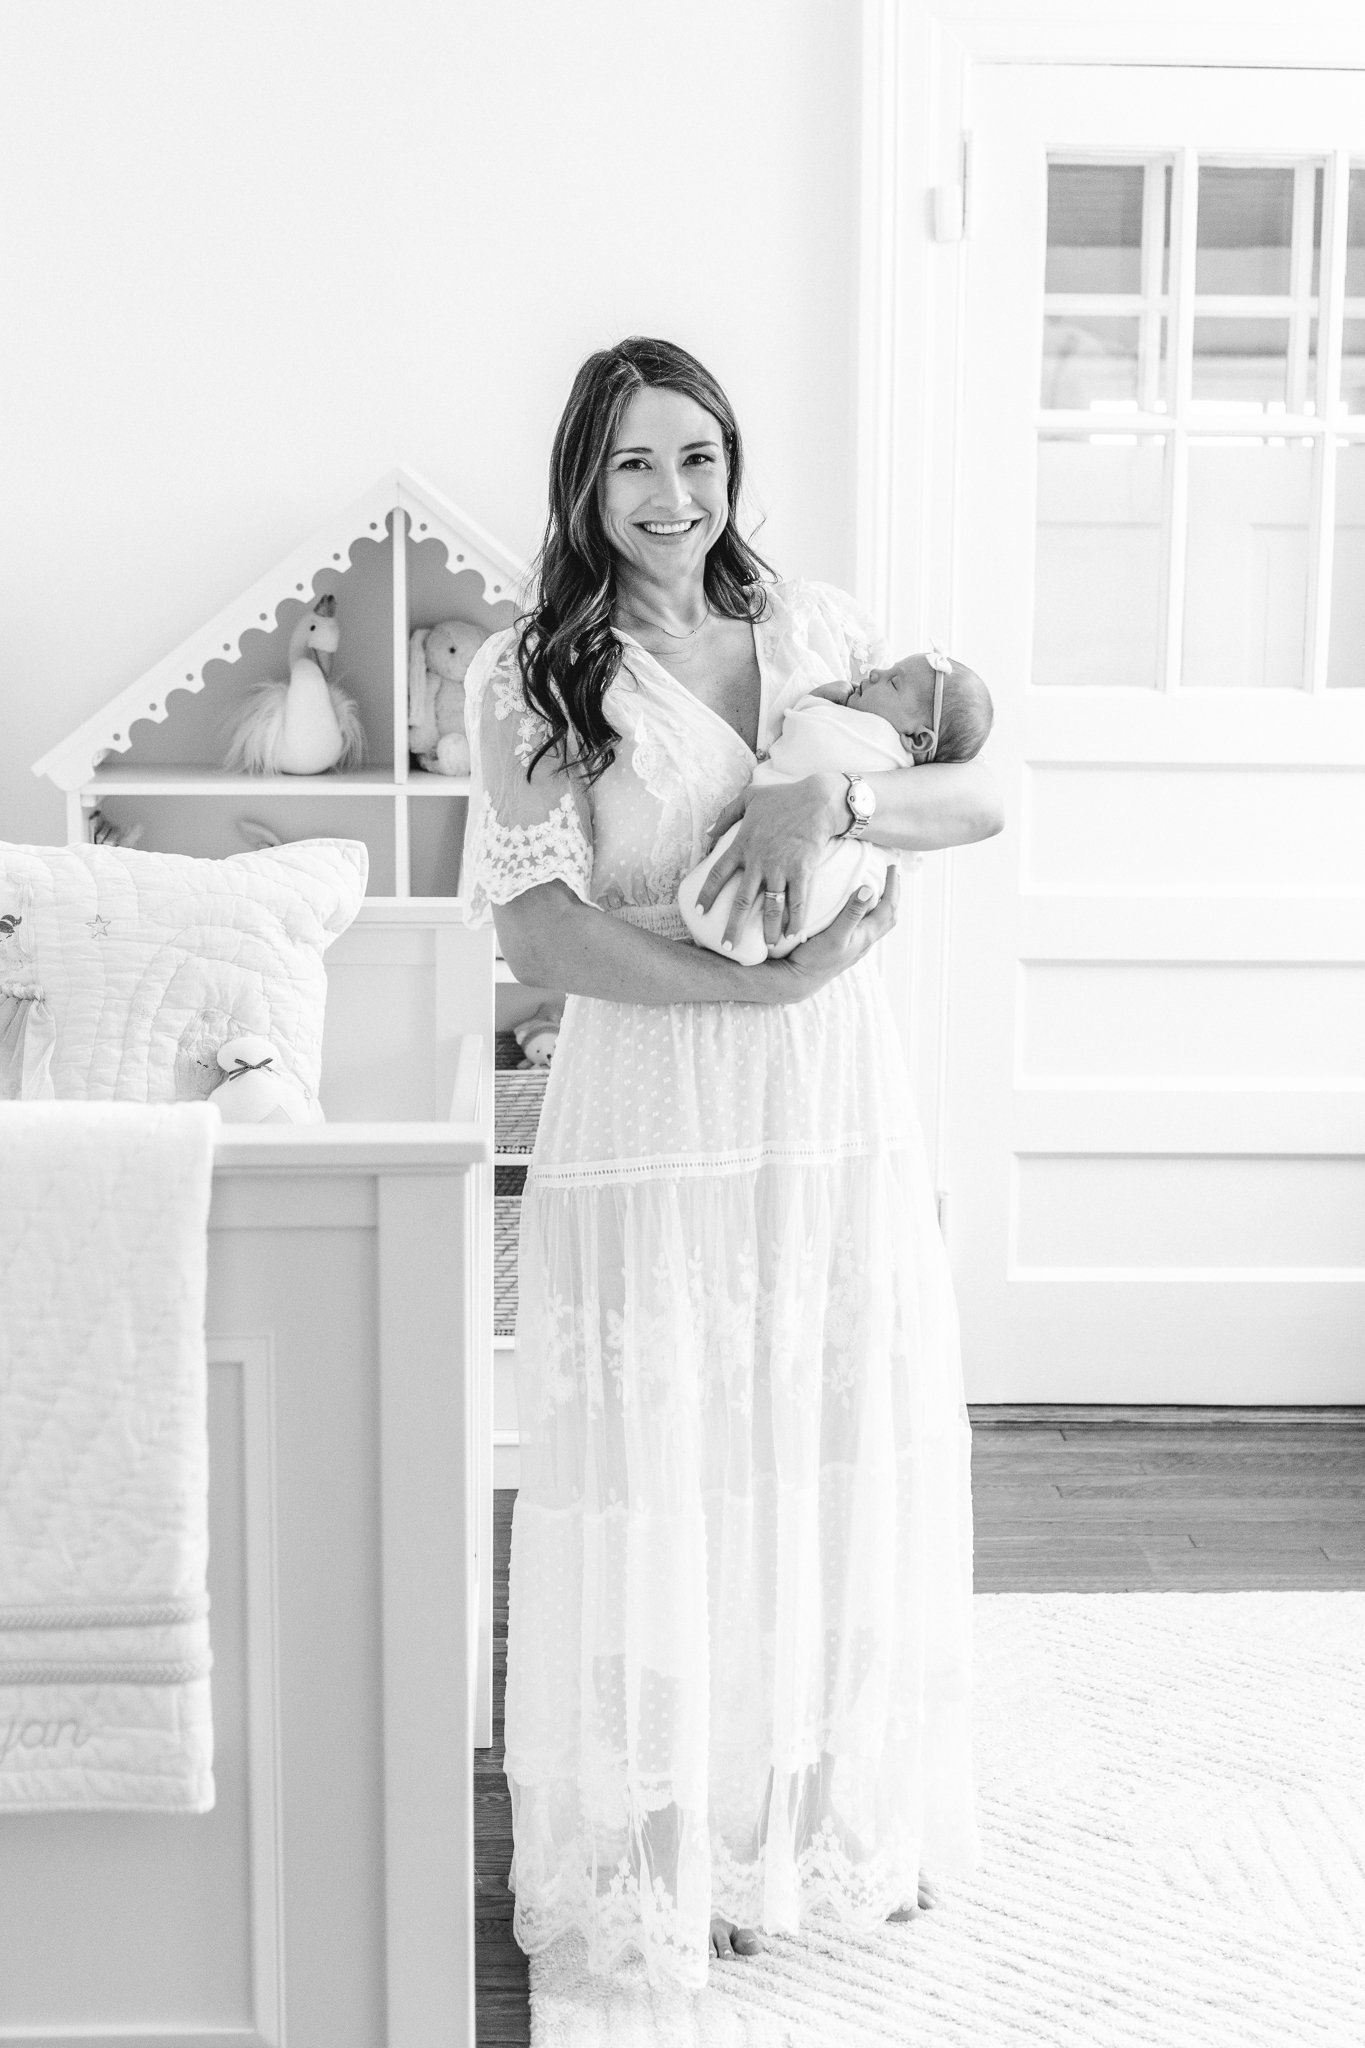  A black and white portrait of a new mother standing in her baby's nursery by Nicole Hawkins Photography. nursery portraits in-home newborn moments #NicoleHawkinsPhotography #NicoleHawkinsNewborns #Babygirl #Newbornfamilyportraits #ChathamNewbornPhot